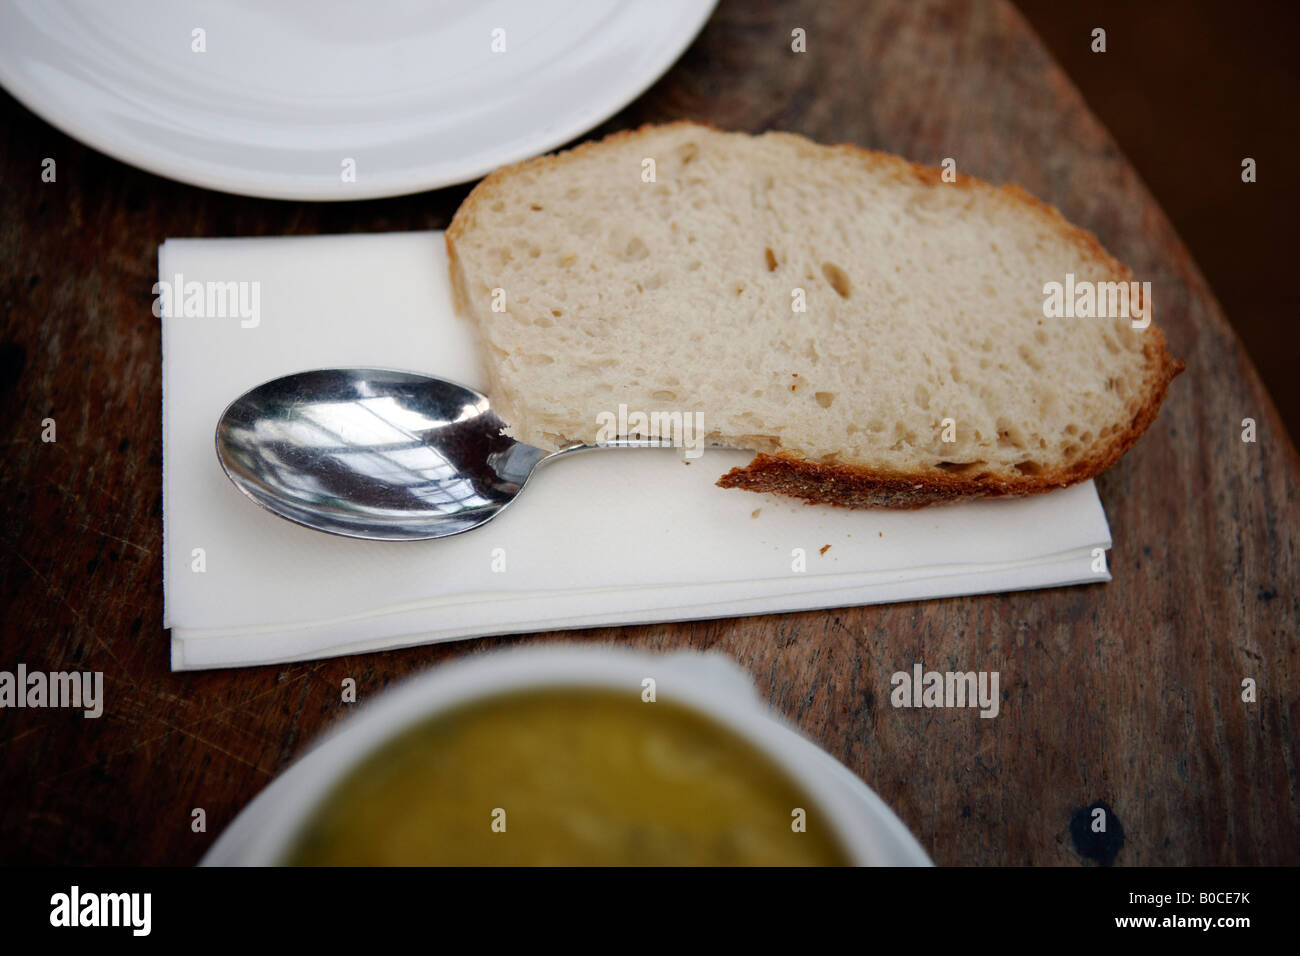 Chunky slice of bread, with a soup spoon. Stock Photo